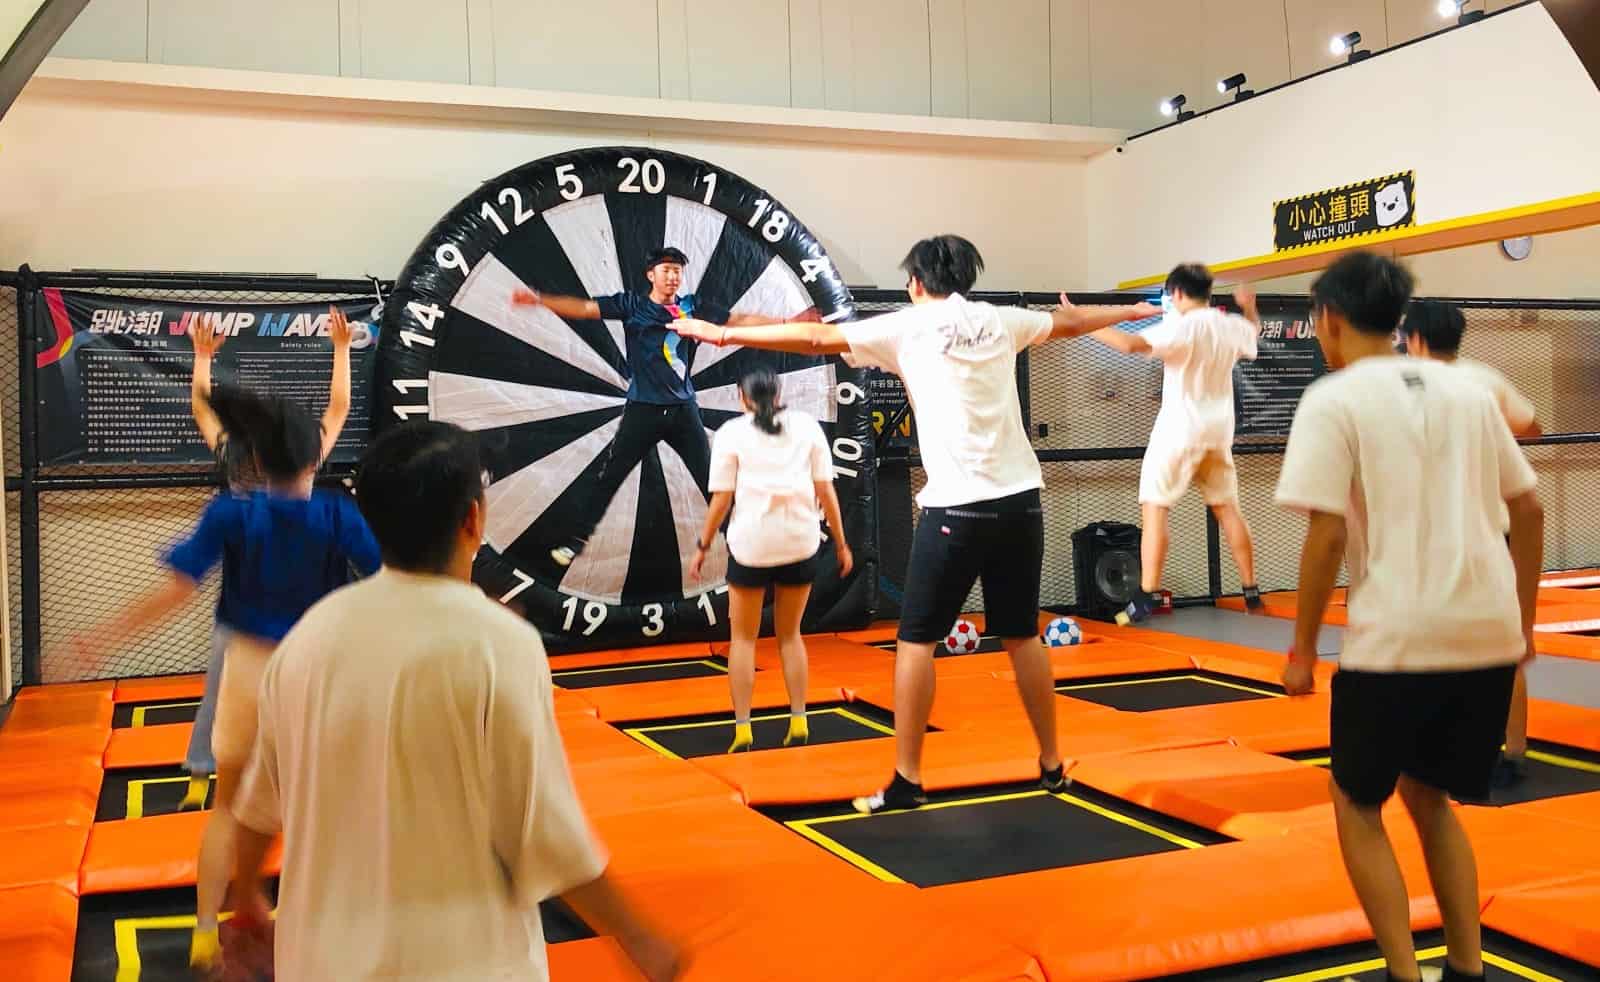 [Taichung Physical Training Recommendation] Bouncer, somersaults, parkour, Taichung physical games that make adrenaline burst